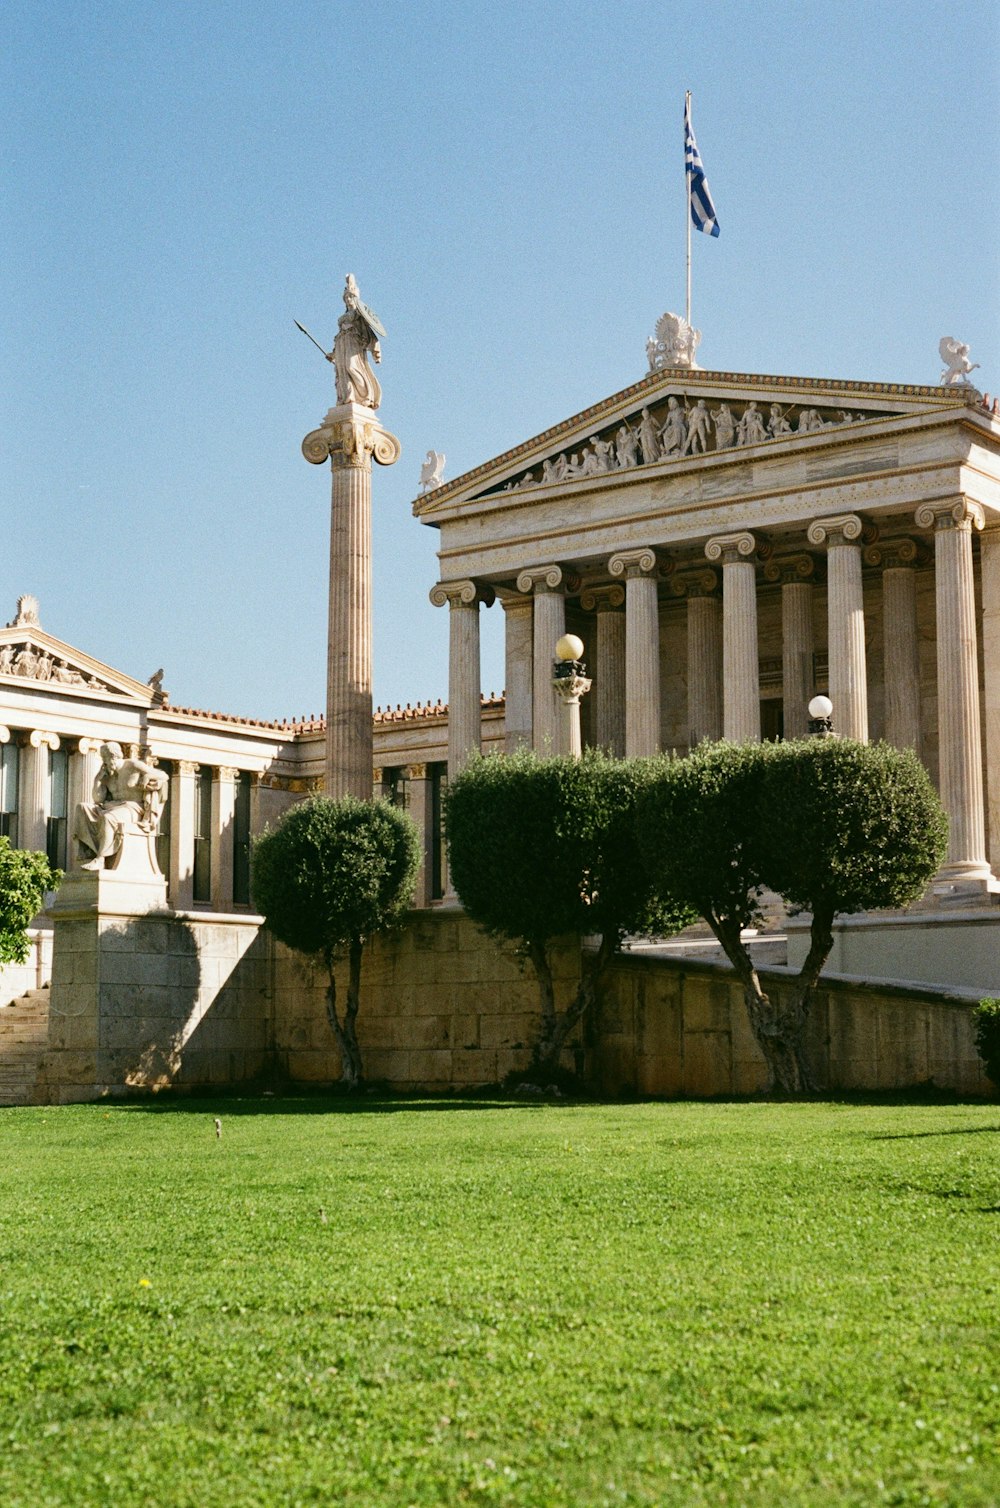 a building with columns and a statue in front of it